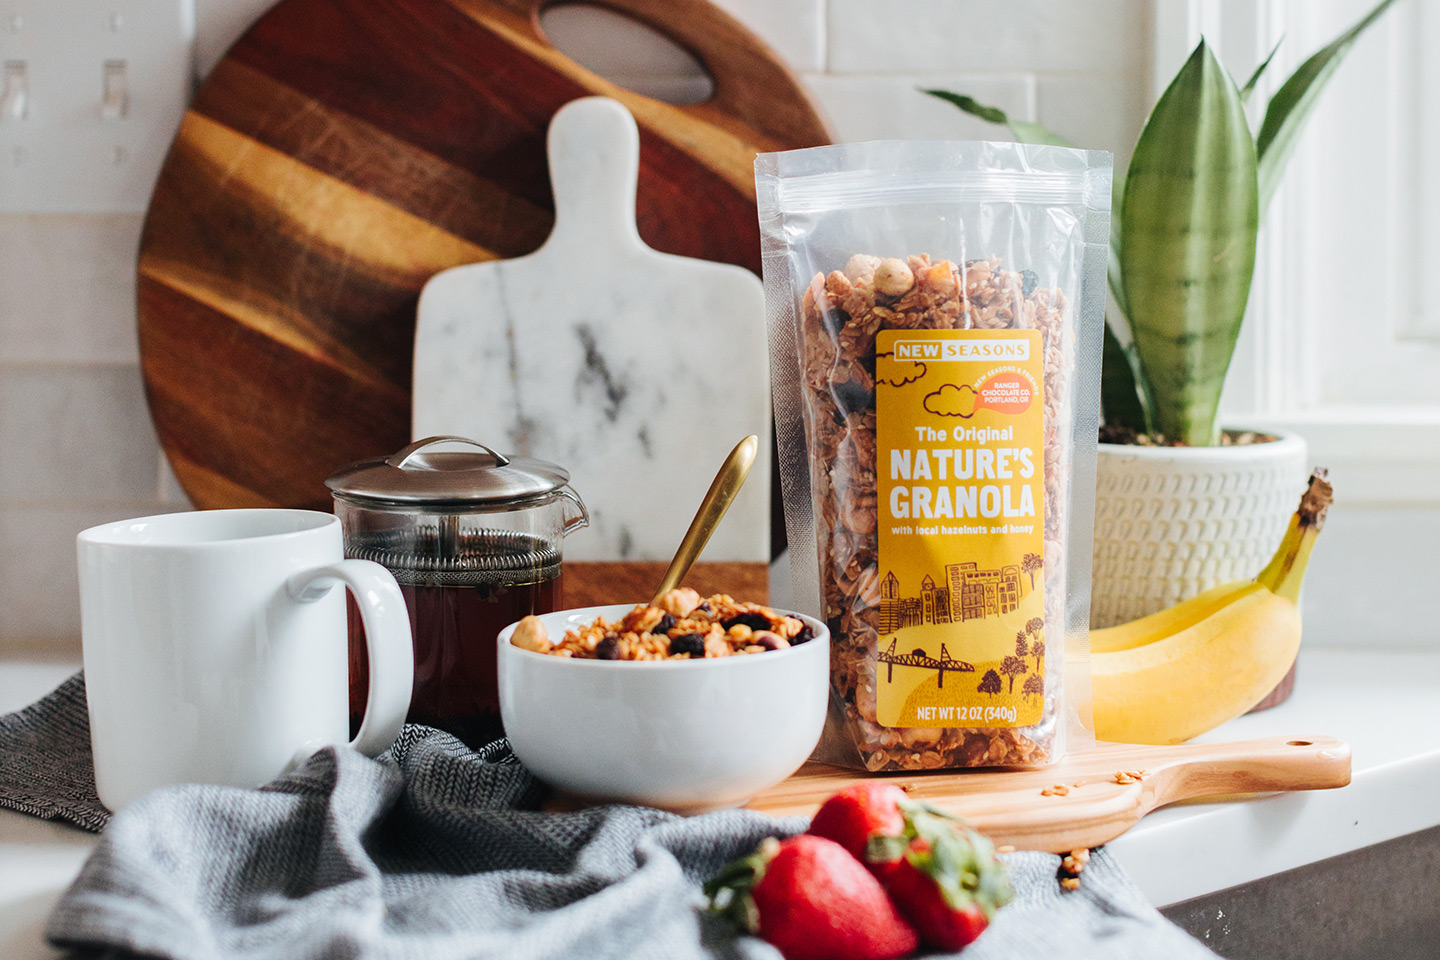 Cutting boards, a cup of coffee, and partner brand granola on a marble countertop